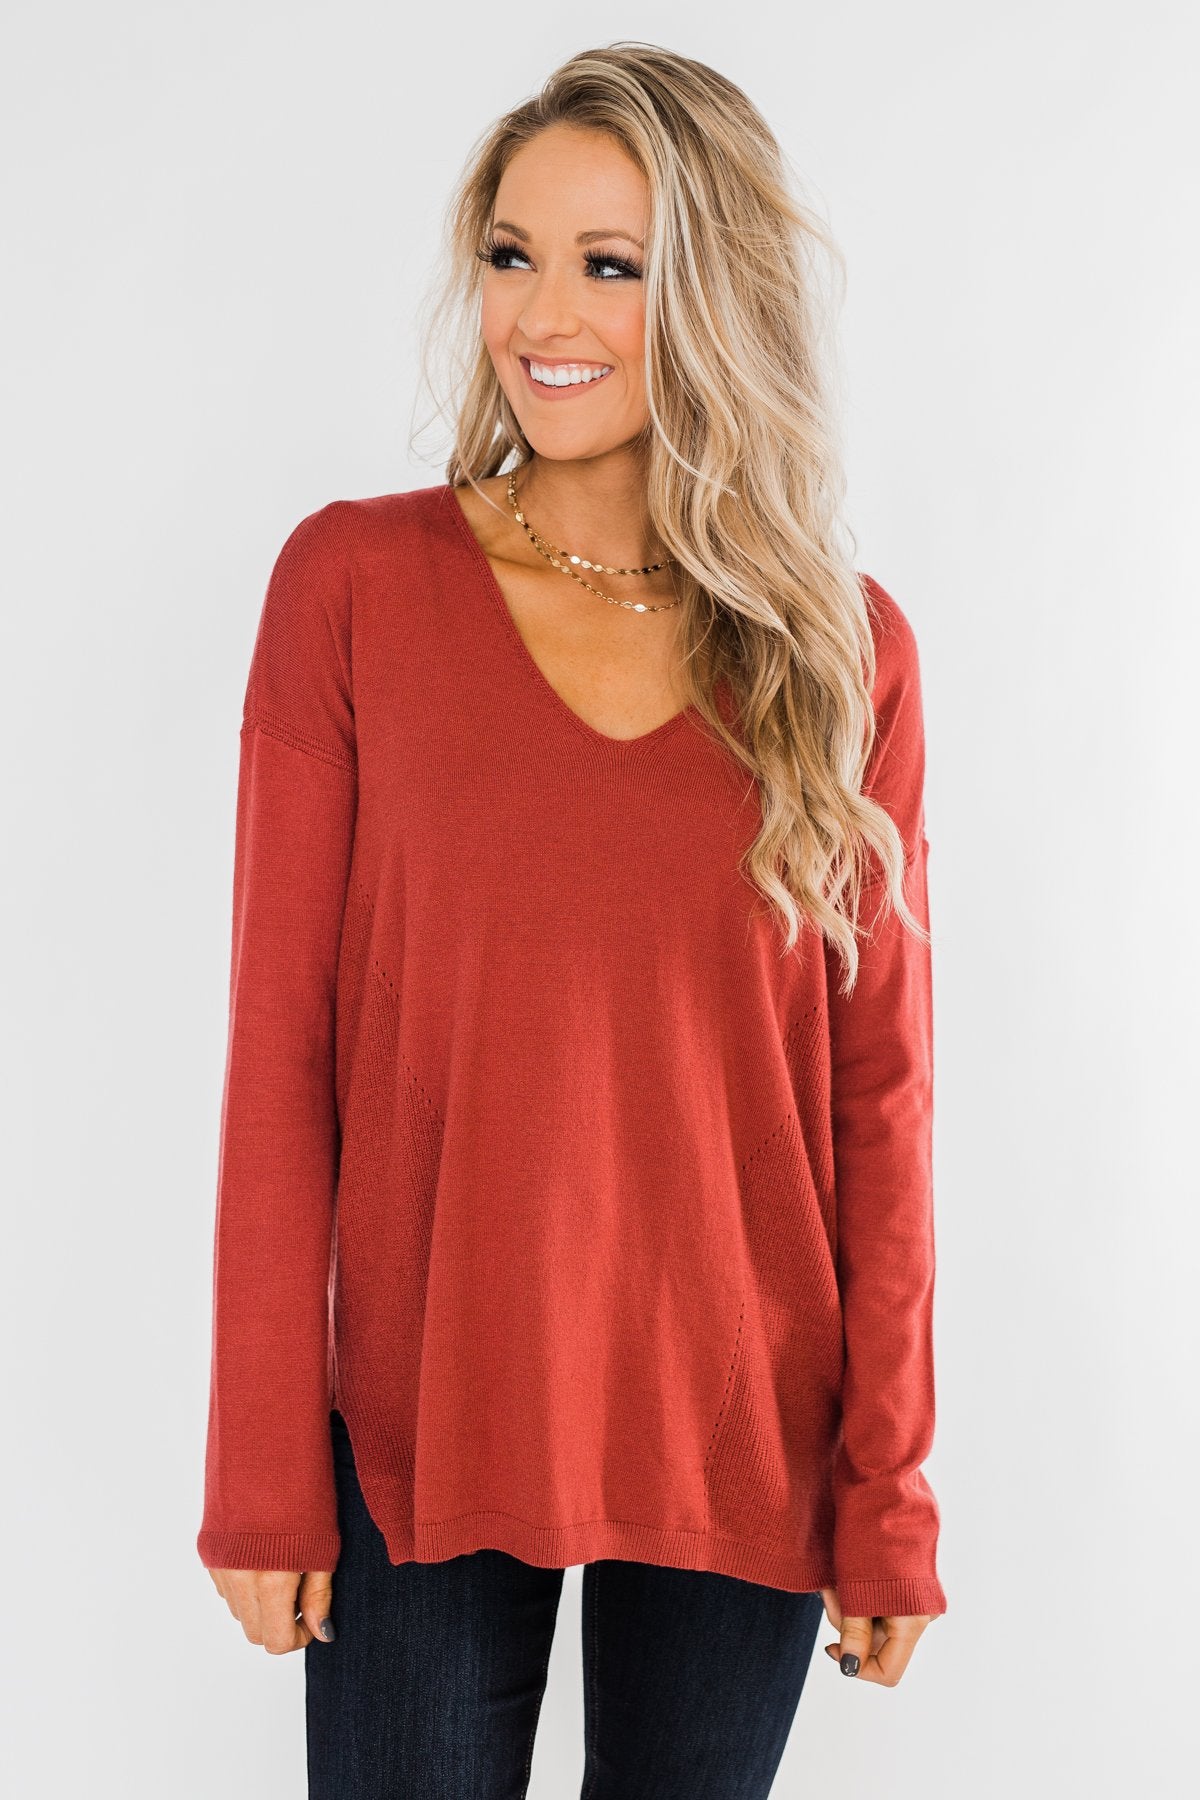 Swept Me Off My Feet Sweater- Rust – The Pulse Boutique